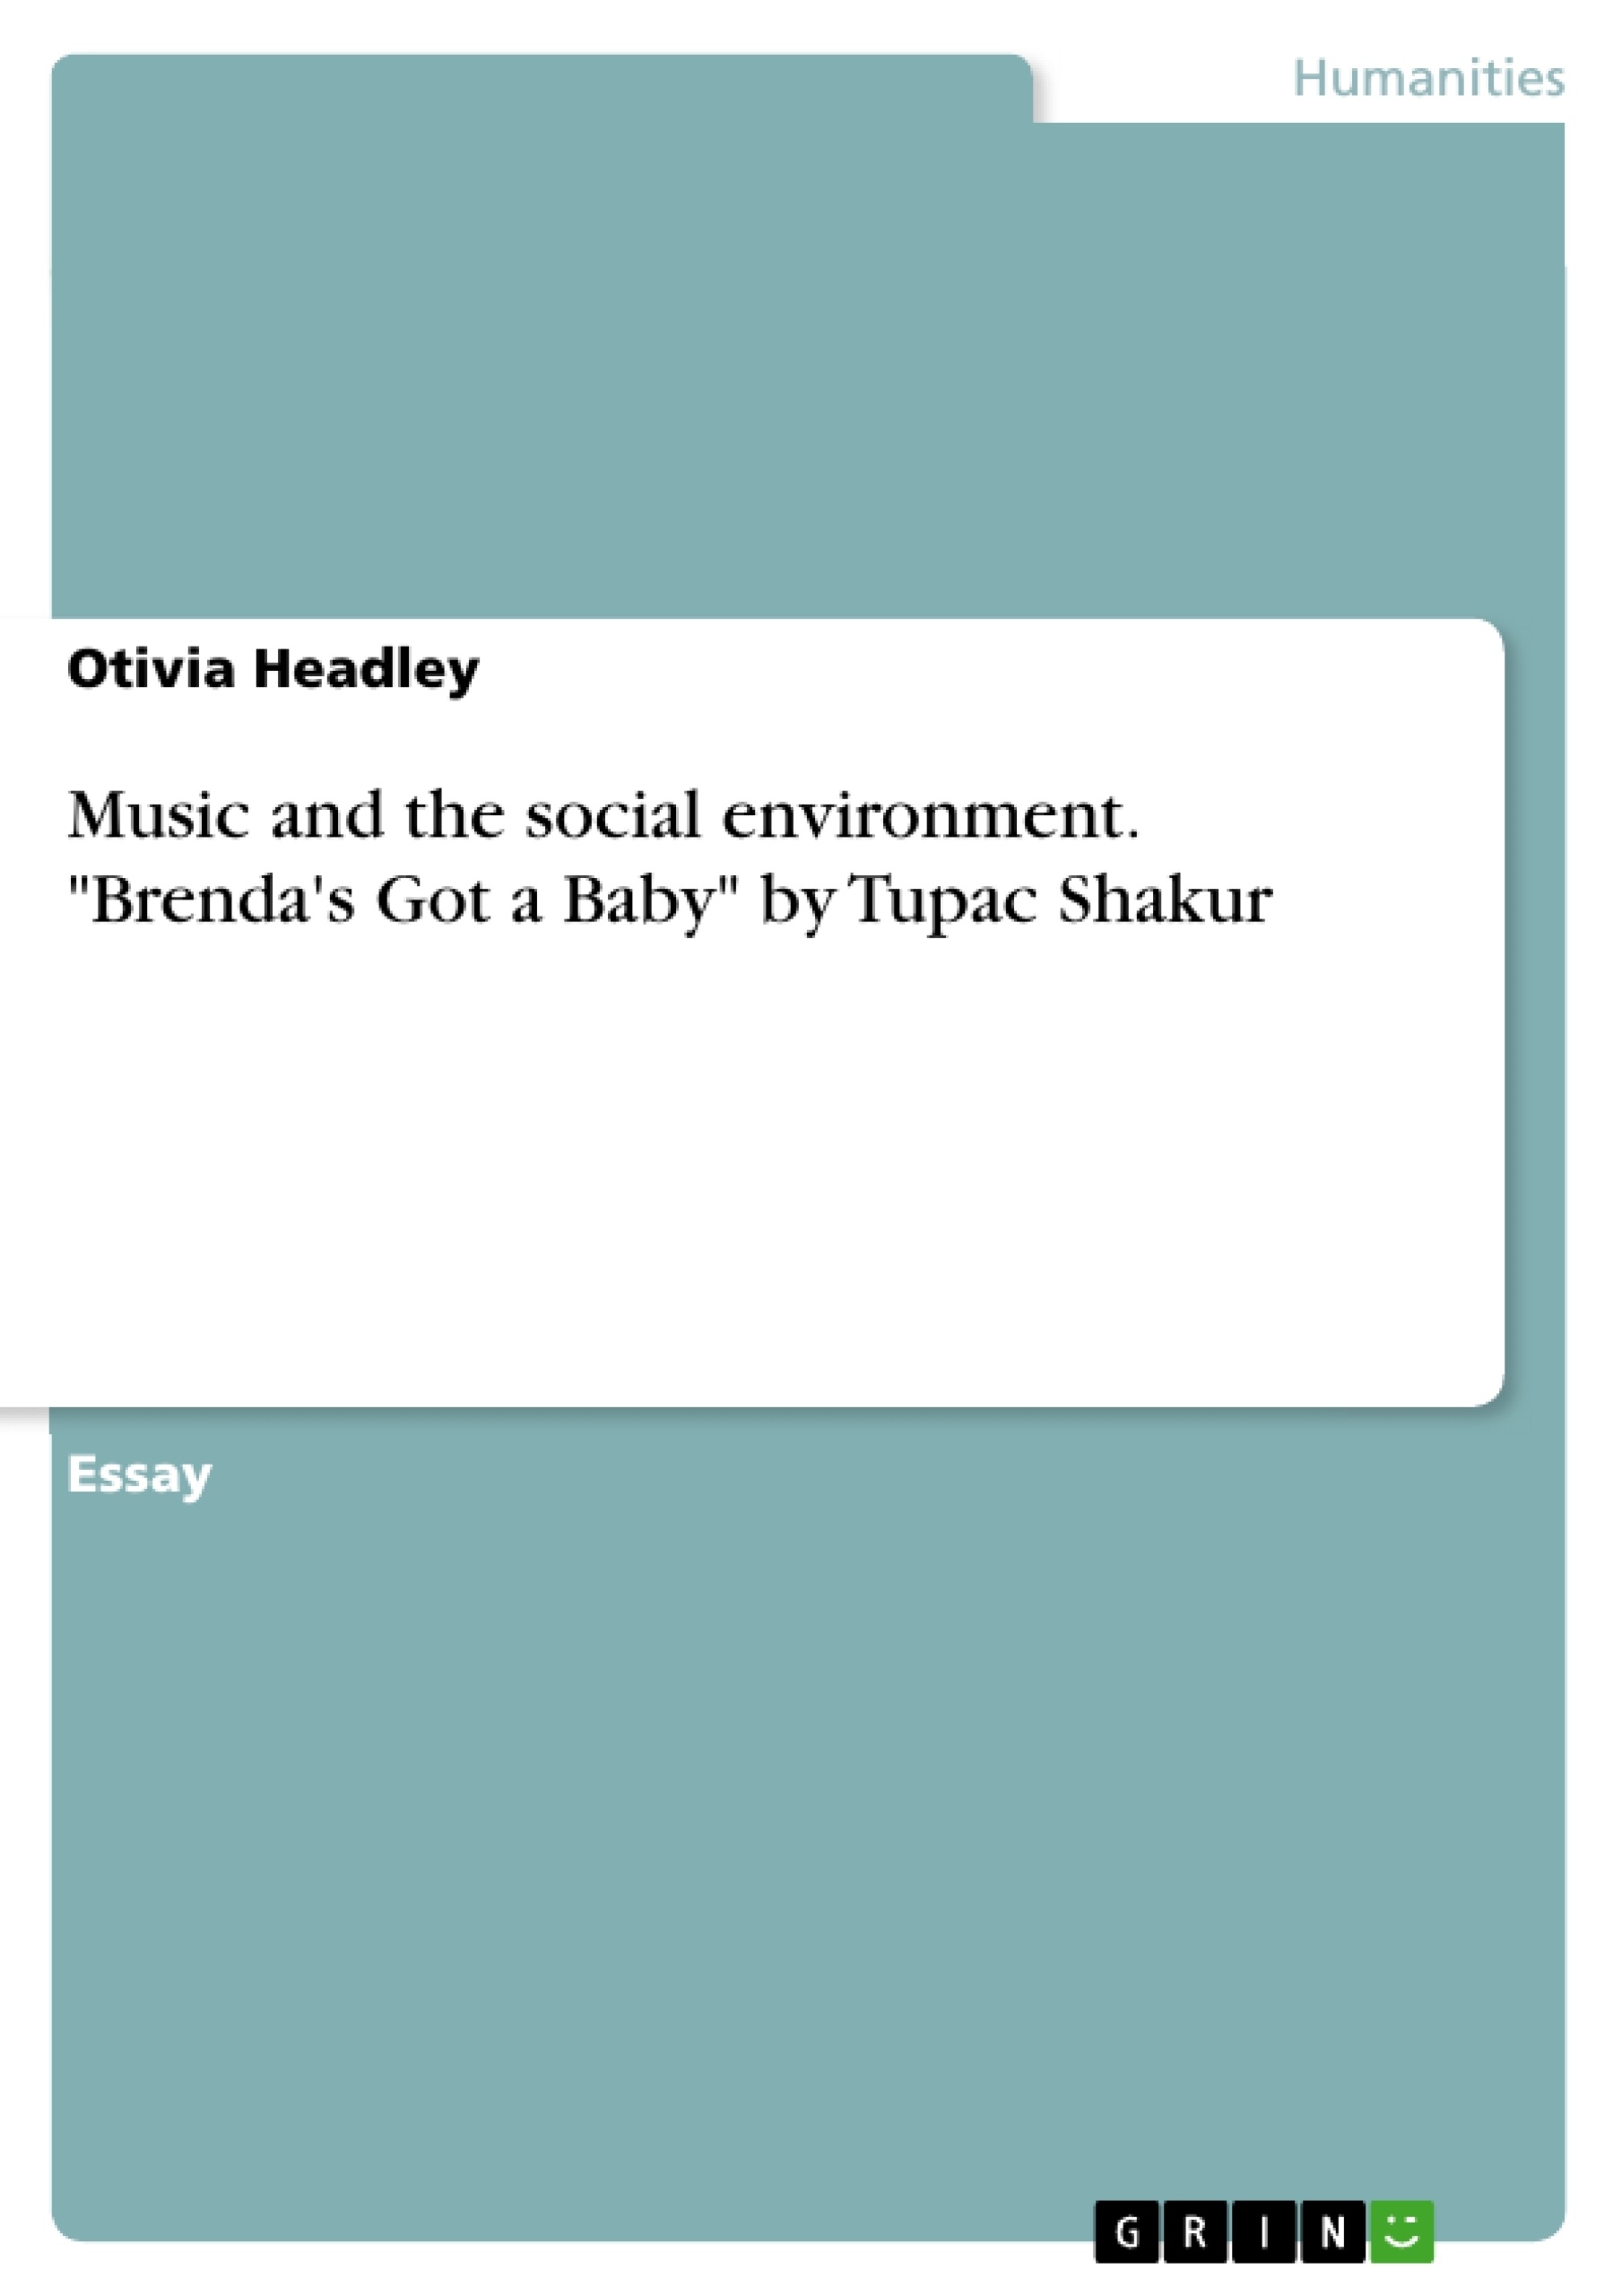 Titre: Music and the social environment. "Brenda's Got a Baby" by Tupac Shakur